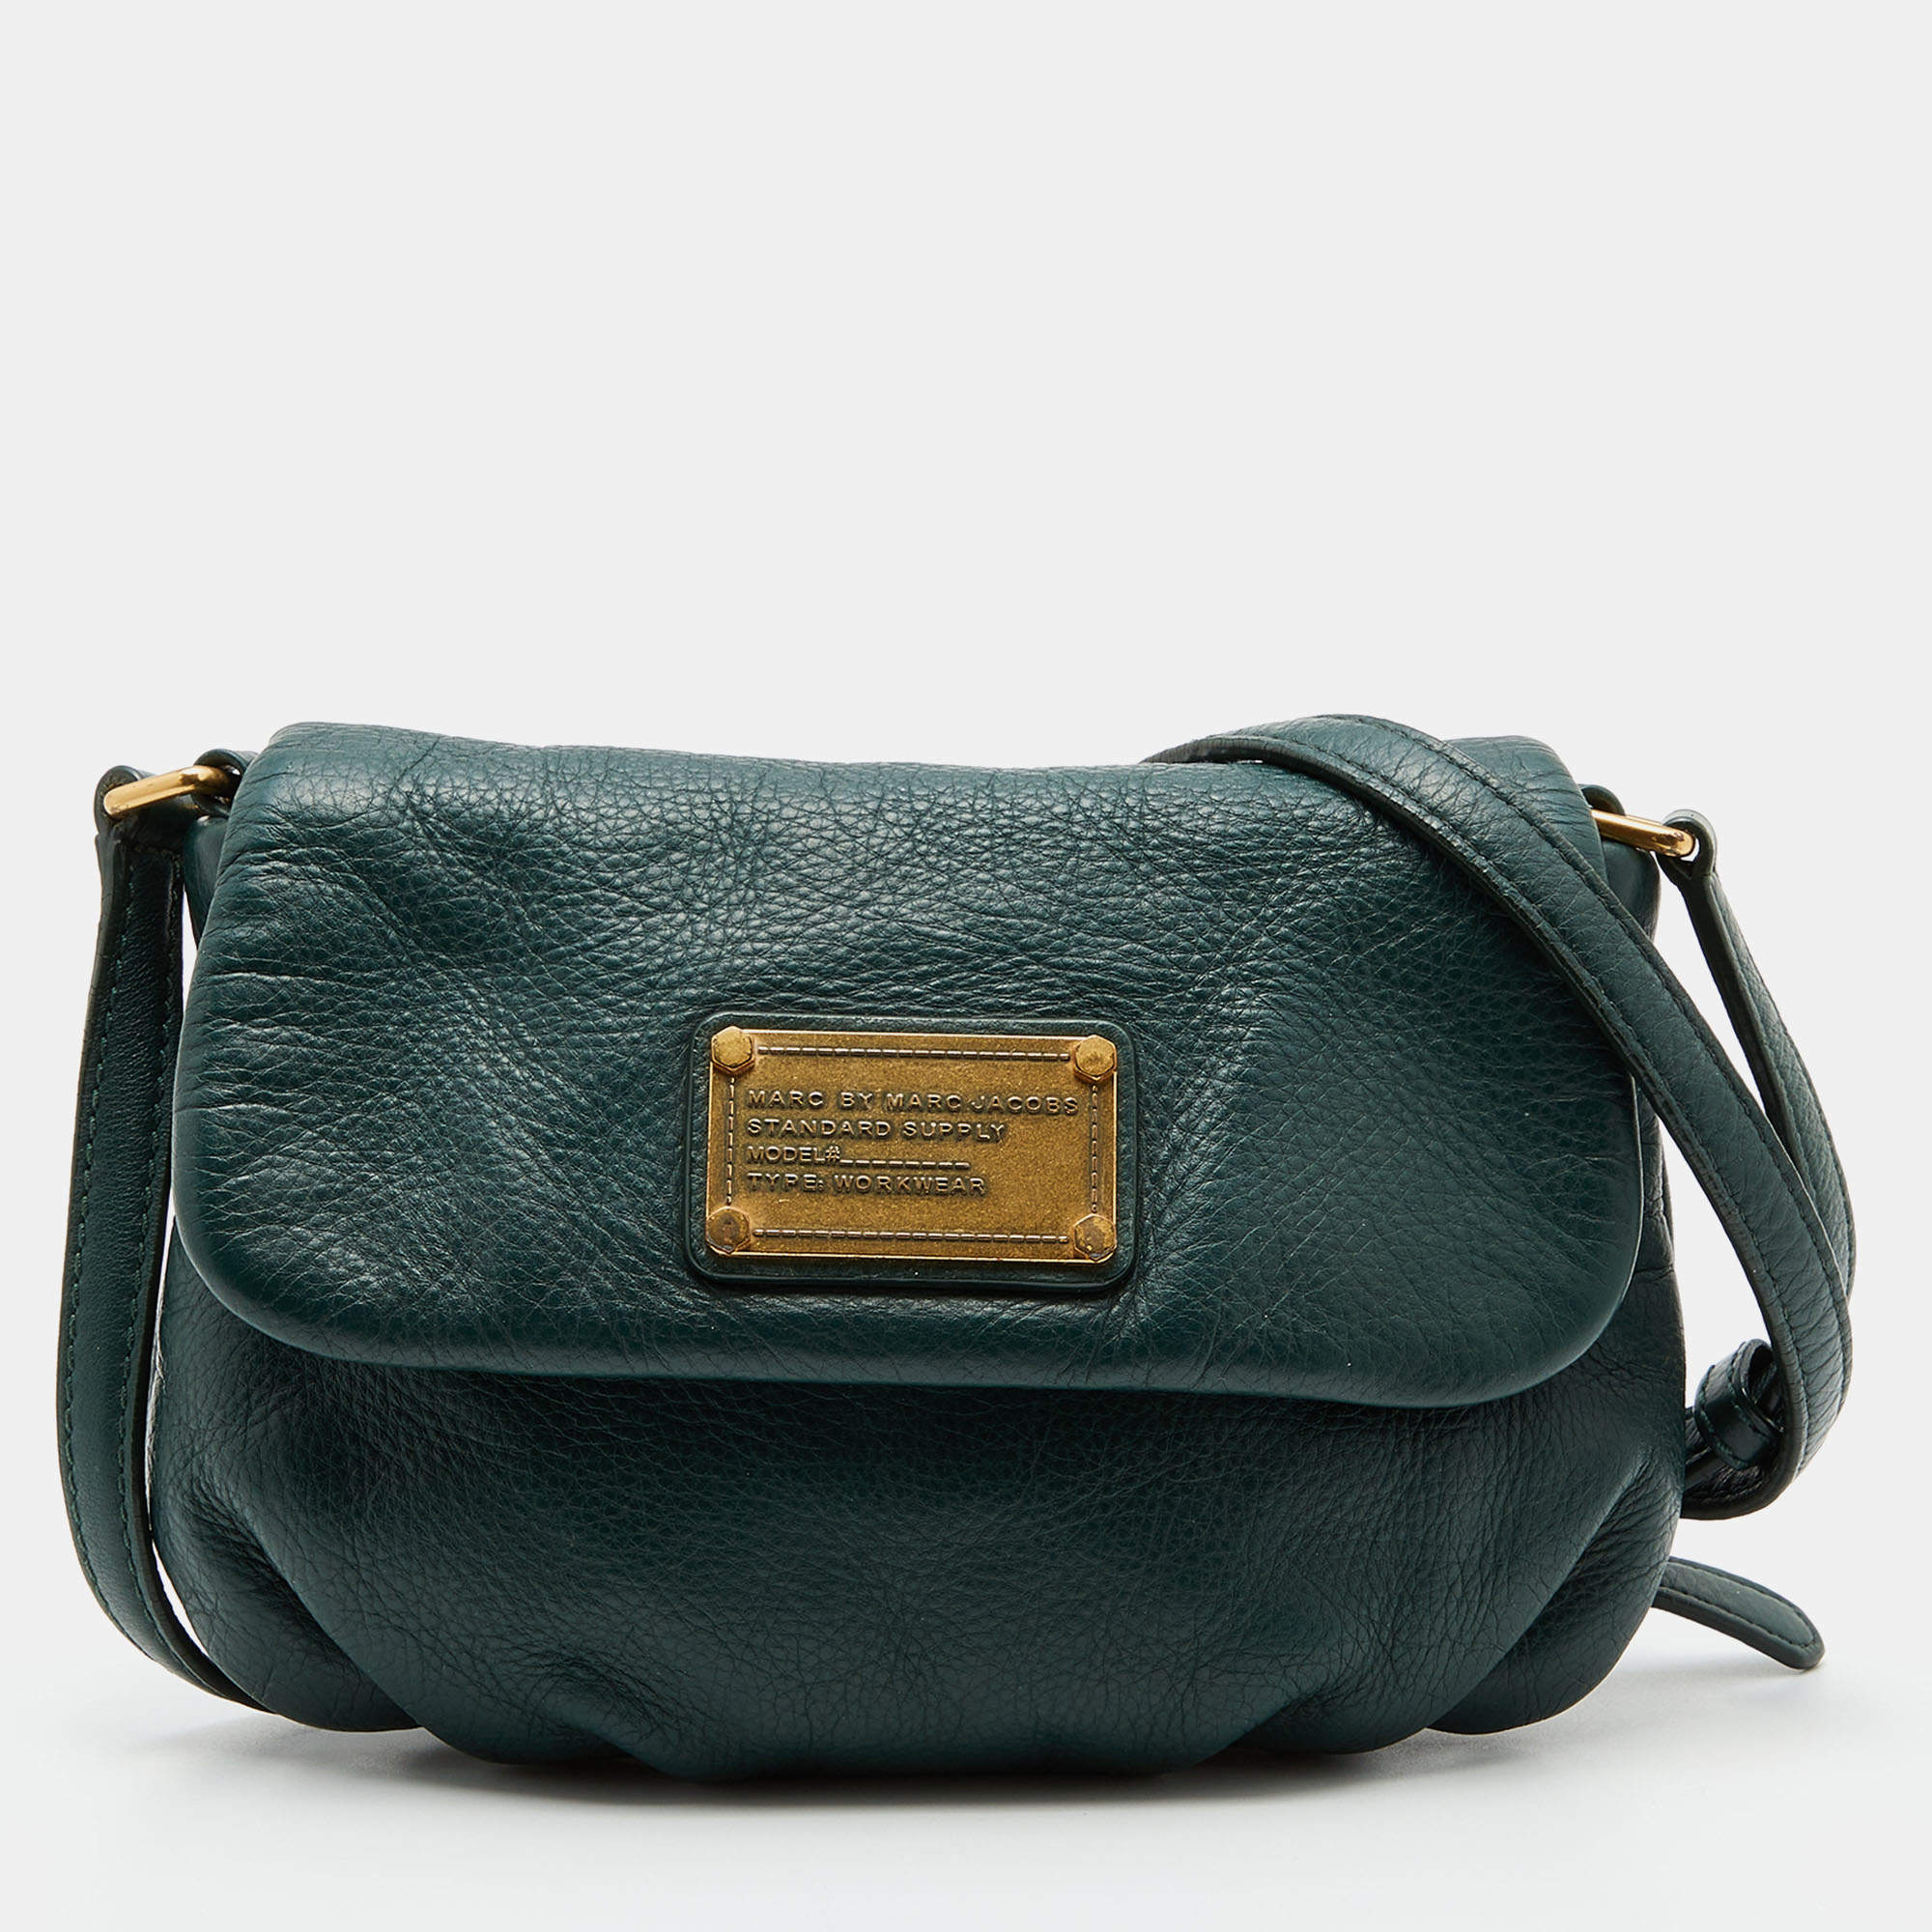 MARC BY MARC JACOBS Crossbody Bags